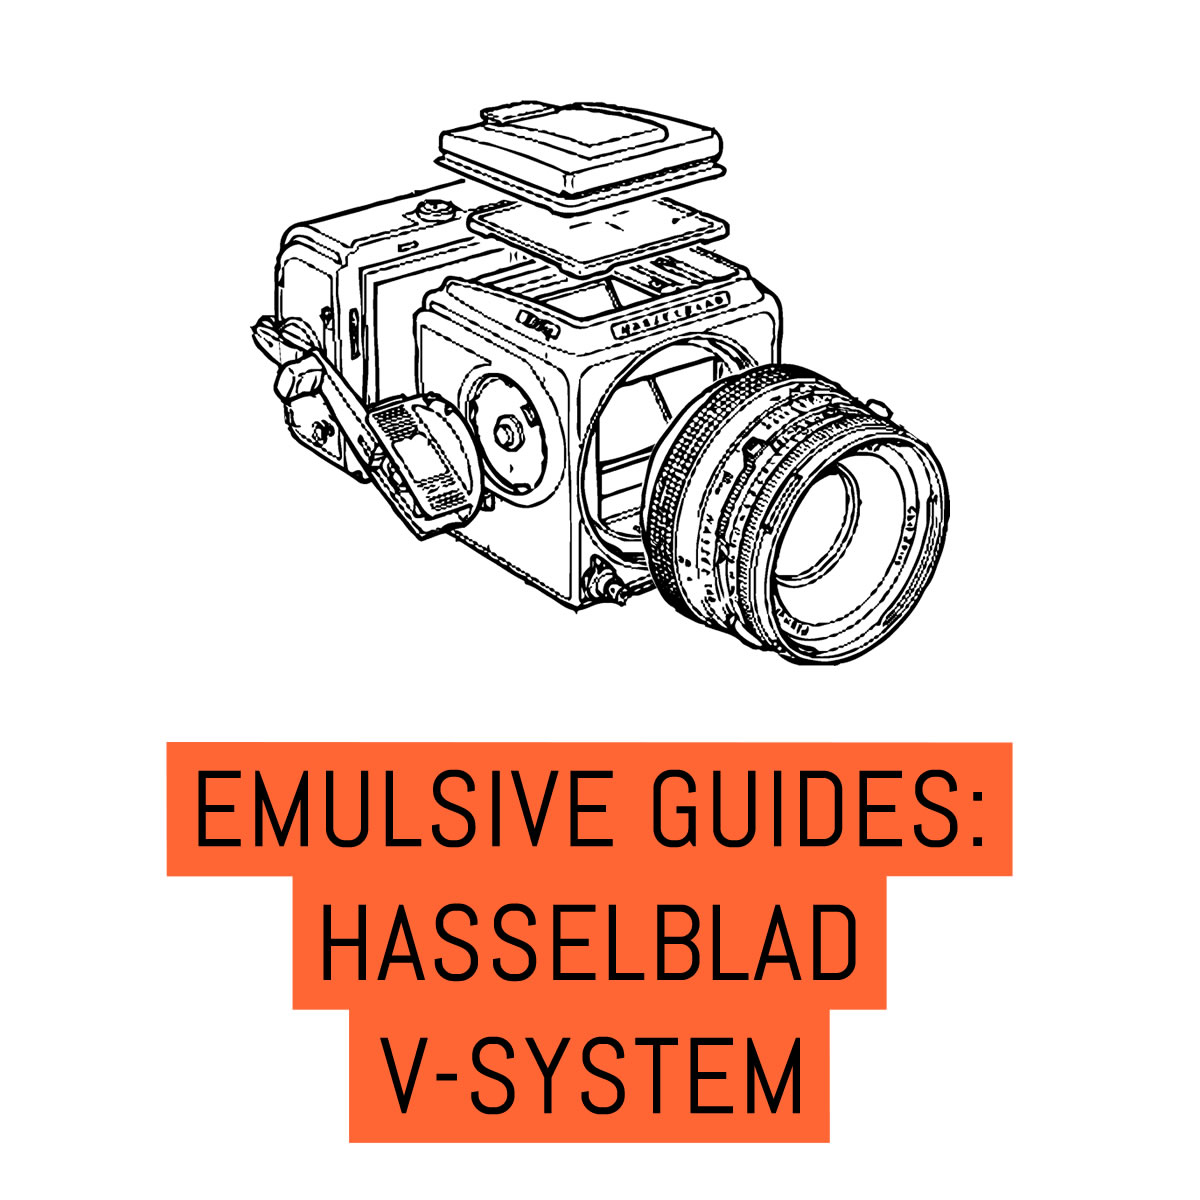 EMULSIVE Guides: The Hasselblad V-System